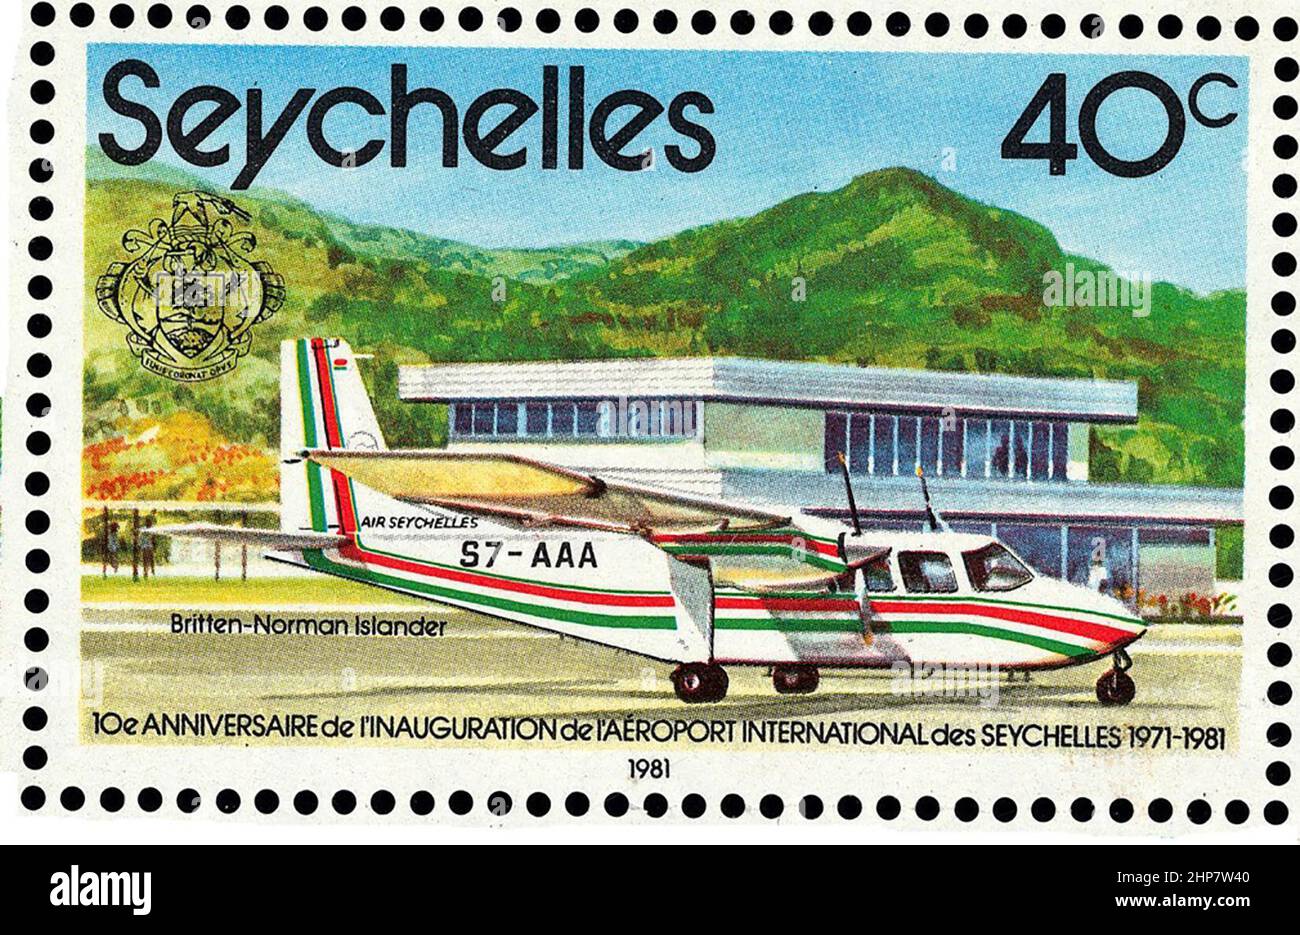 A stamp of Seychelles from 1981, commemorating the opening of the International Airport of Seychelles. The plane in the stamp is a  Britten-Norman Islander Stock Photo